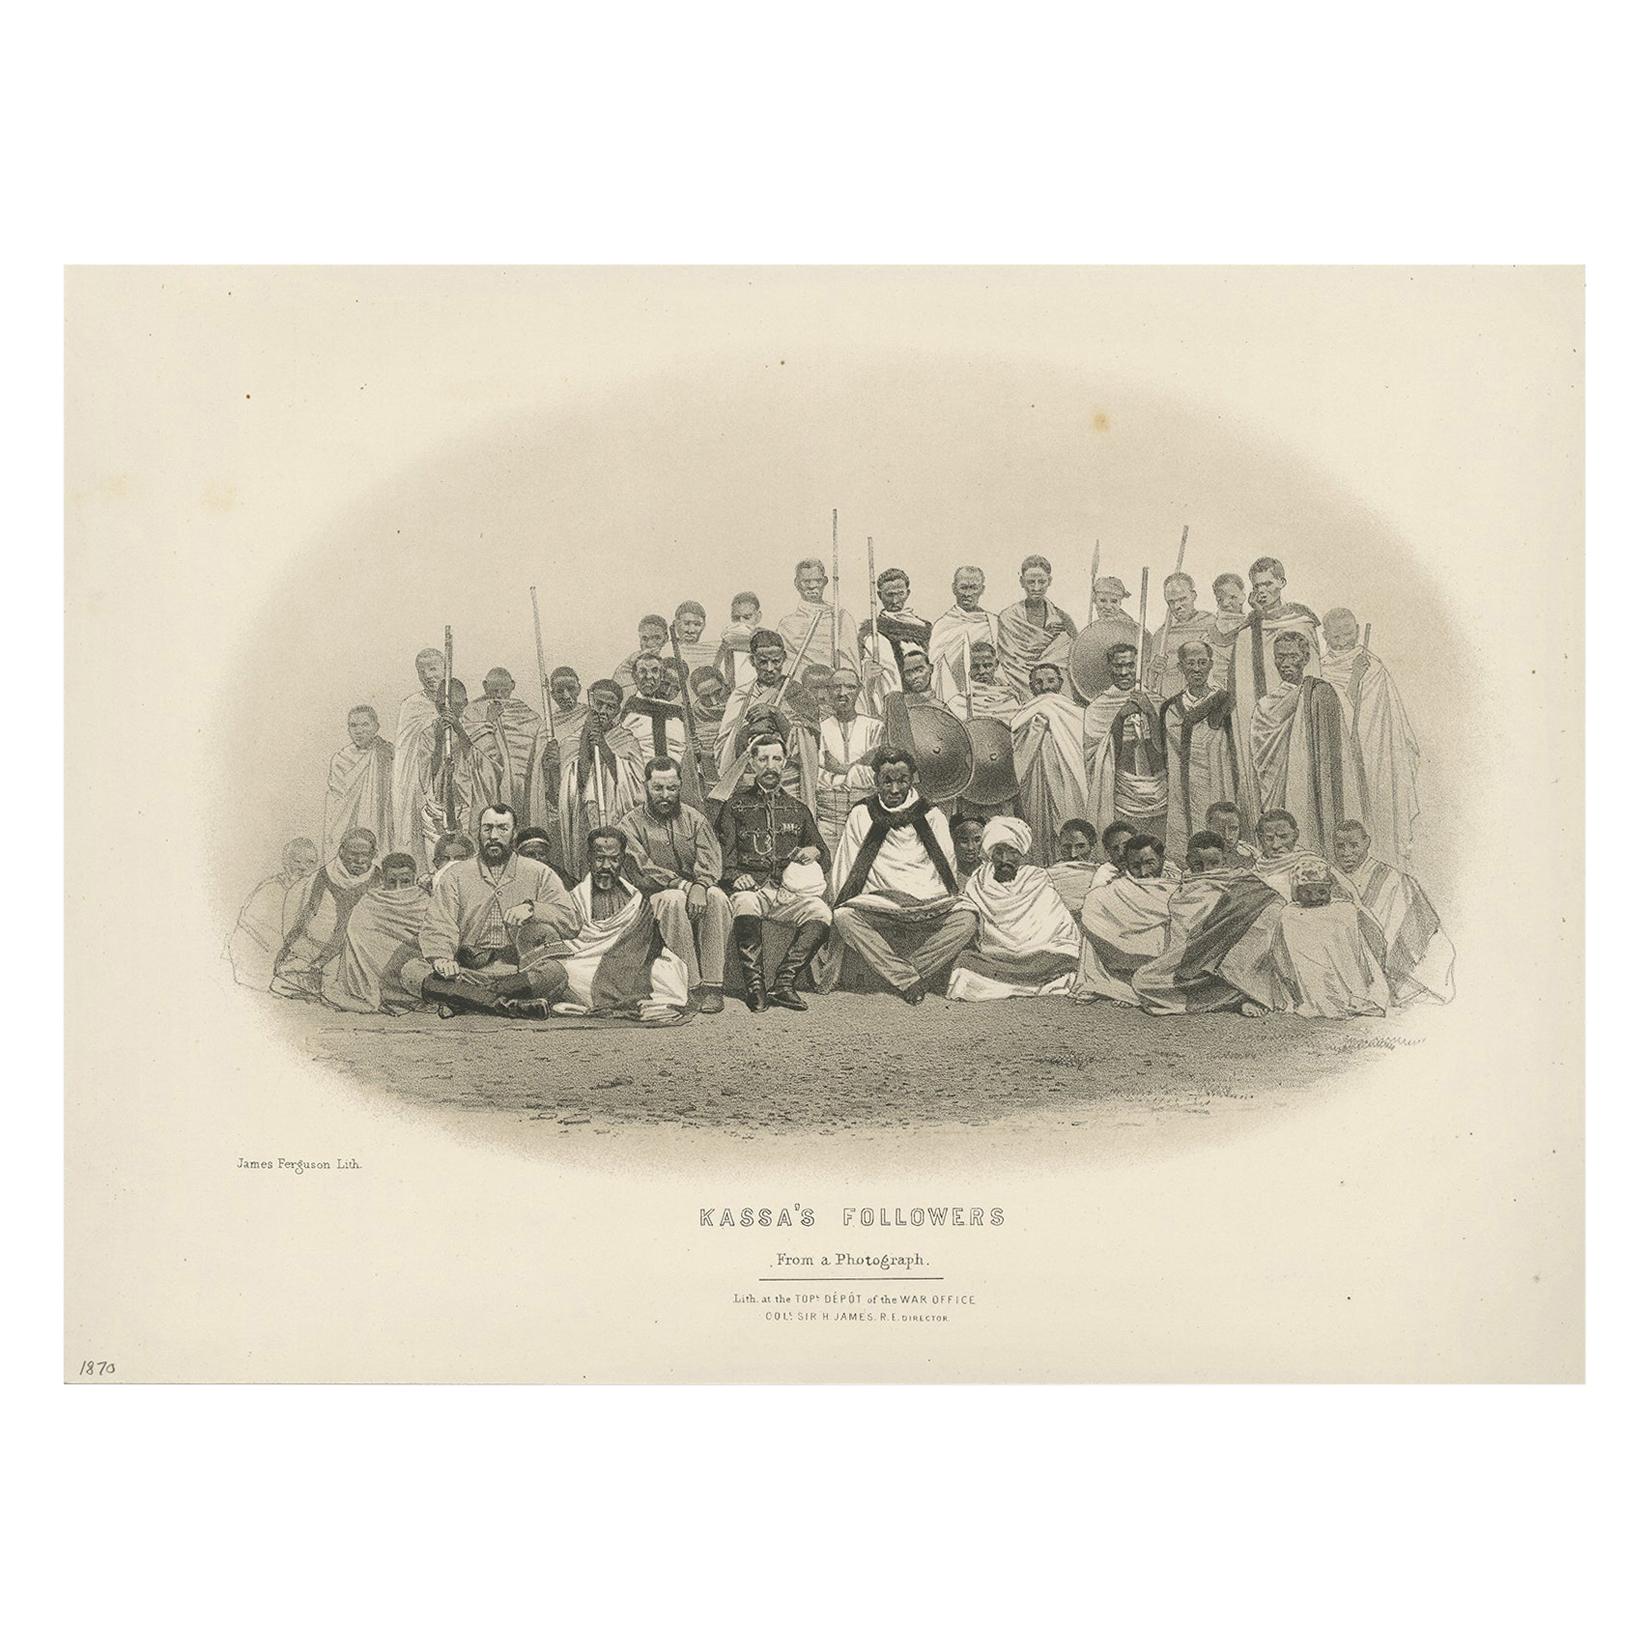 Antique Print of the Followers of the Emperor by Ferguson, 1870